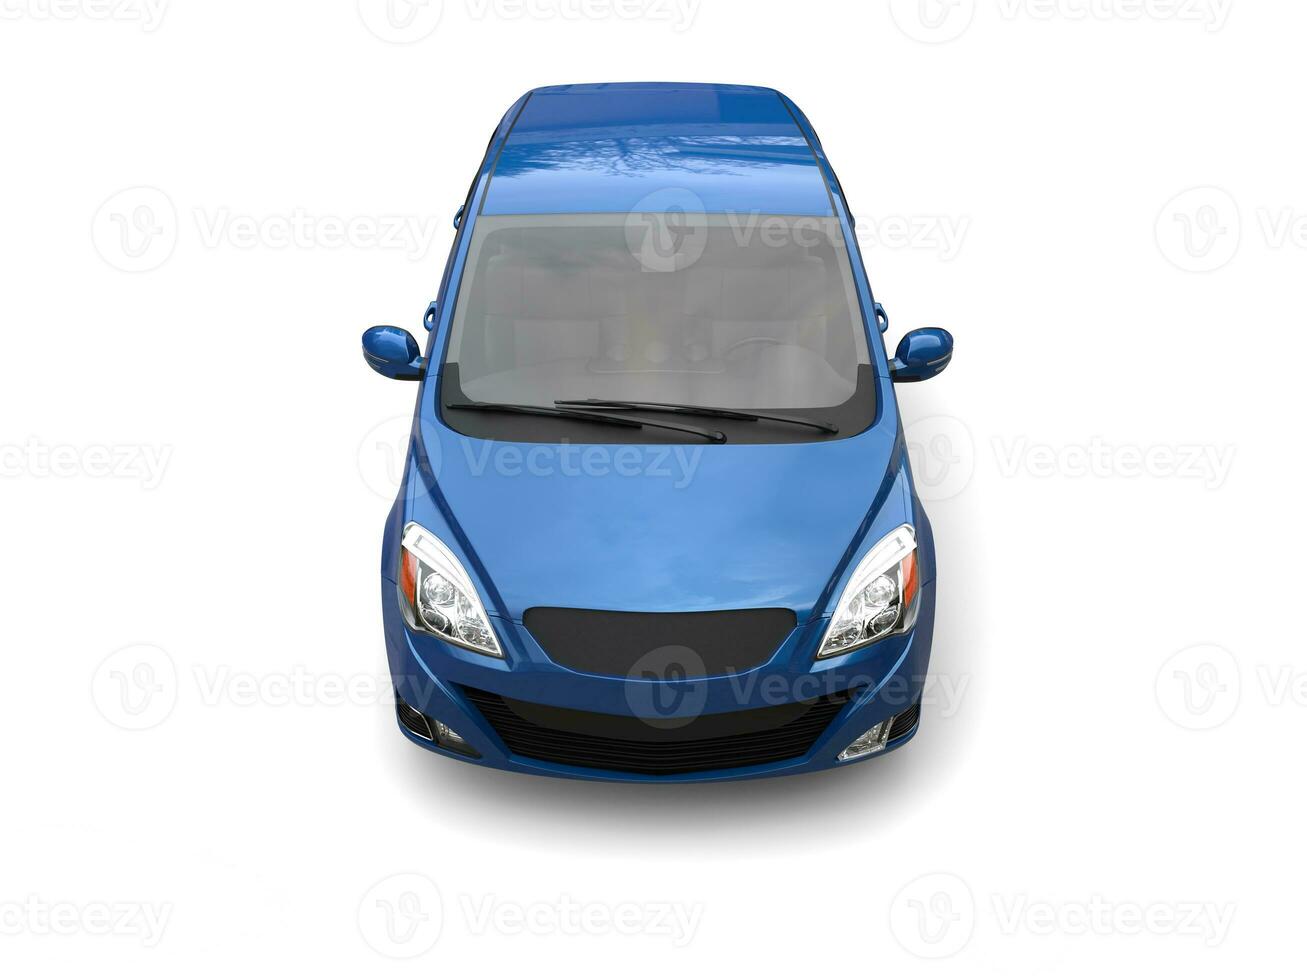 Modern small compact economic car in dark blue color - top down view - isolated on white background photo